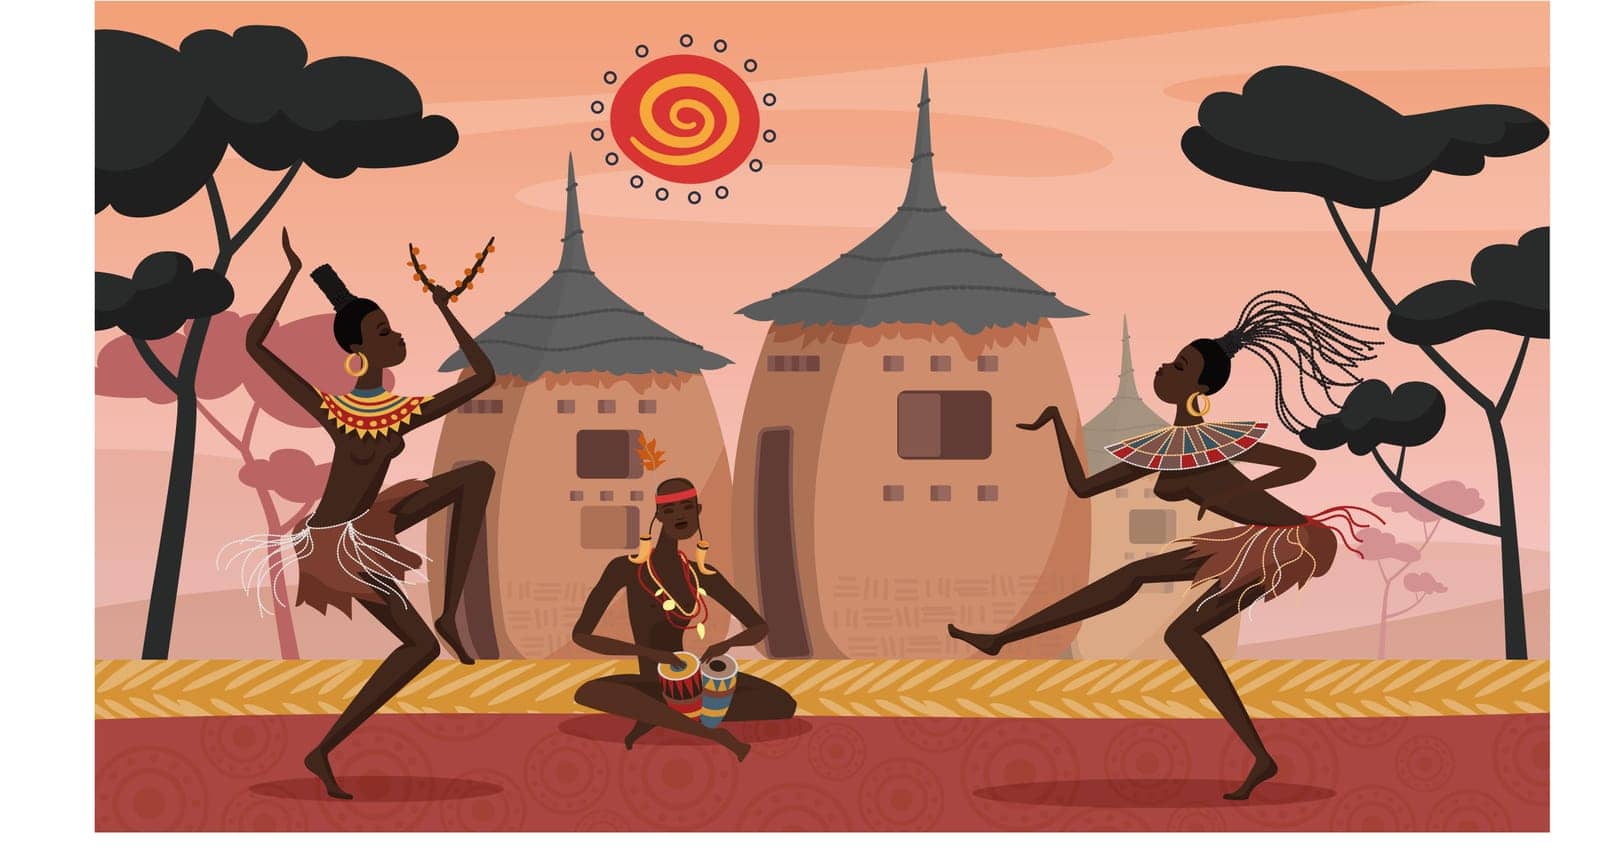 African people dance on ethnic ritual ceremony, tribal culture vector illustration. Cartoon aborigines dancers playing drums with decorative native patterns, dancing in village of Africa background